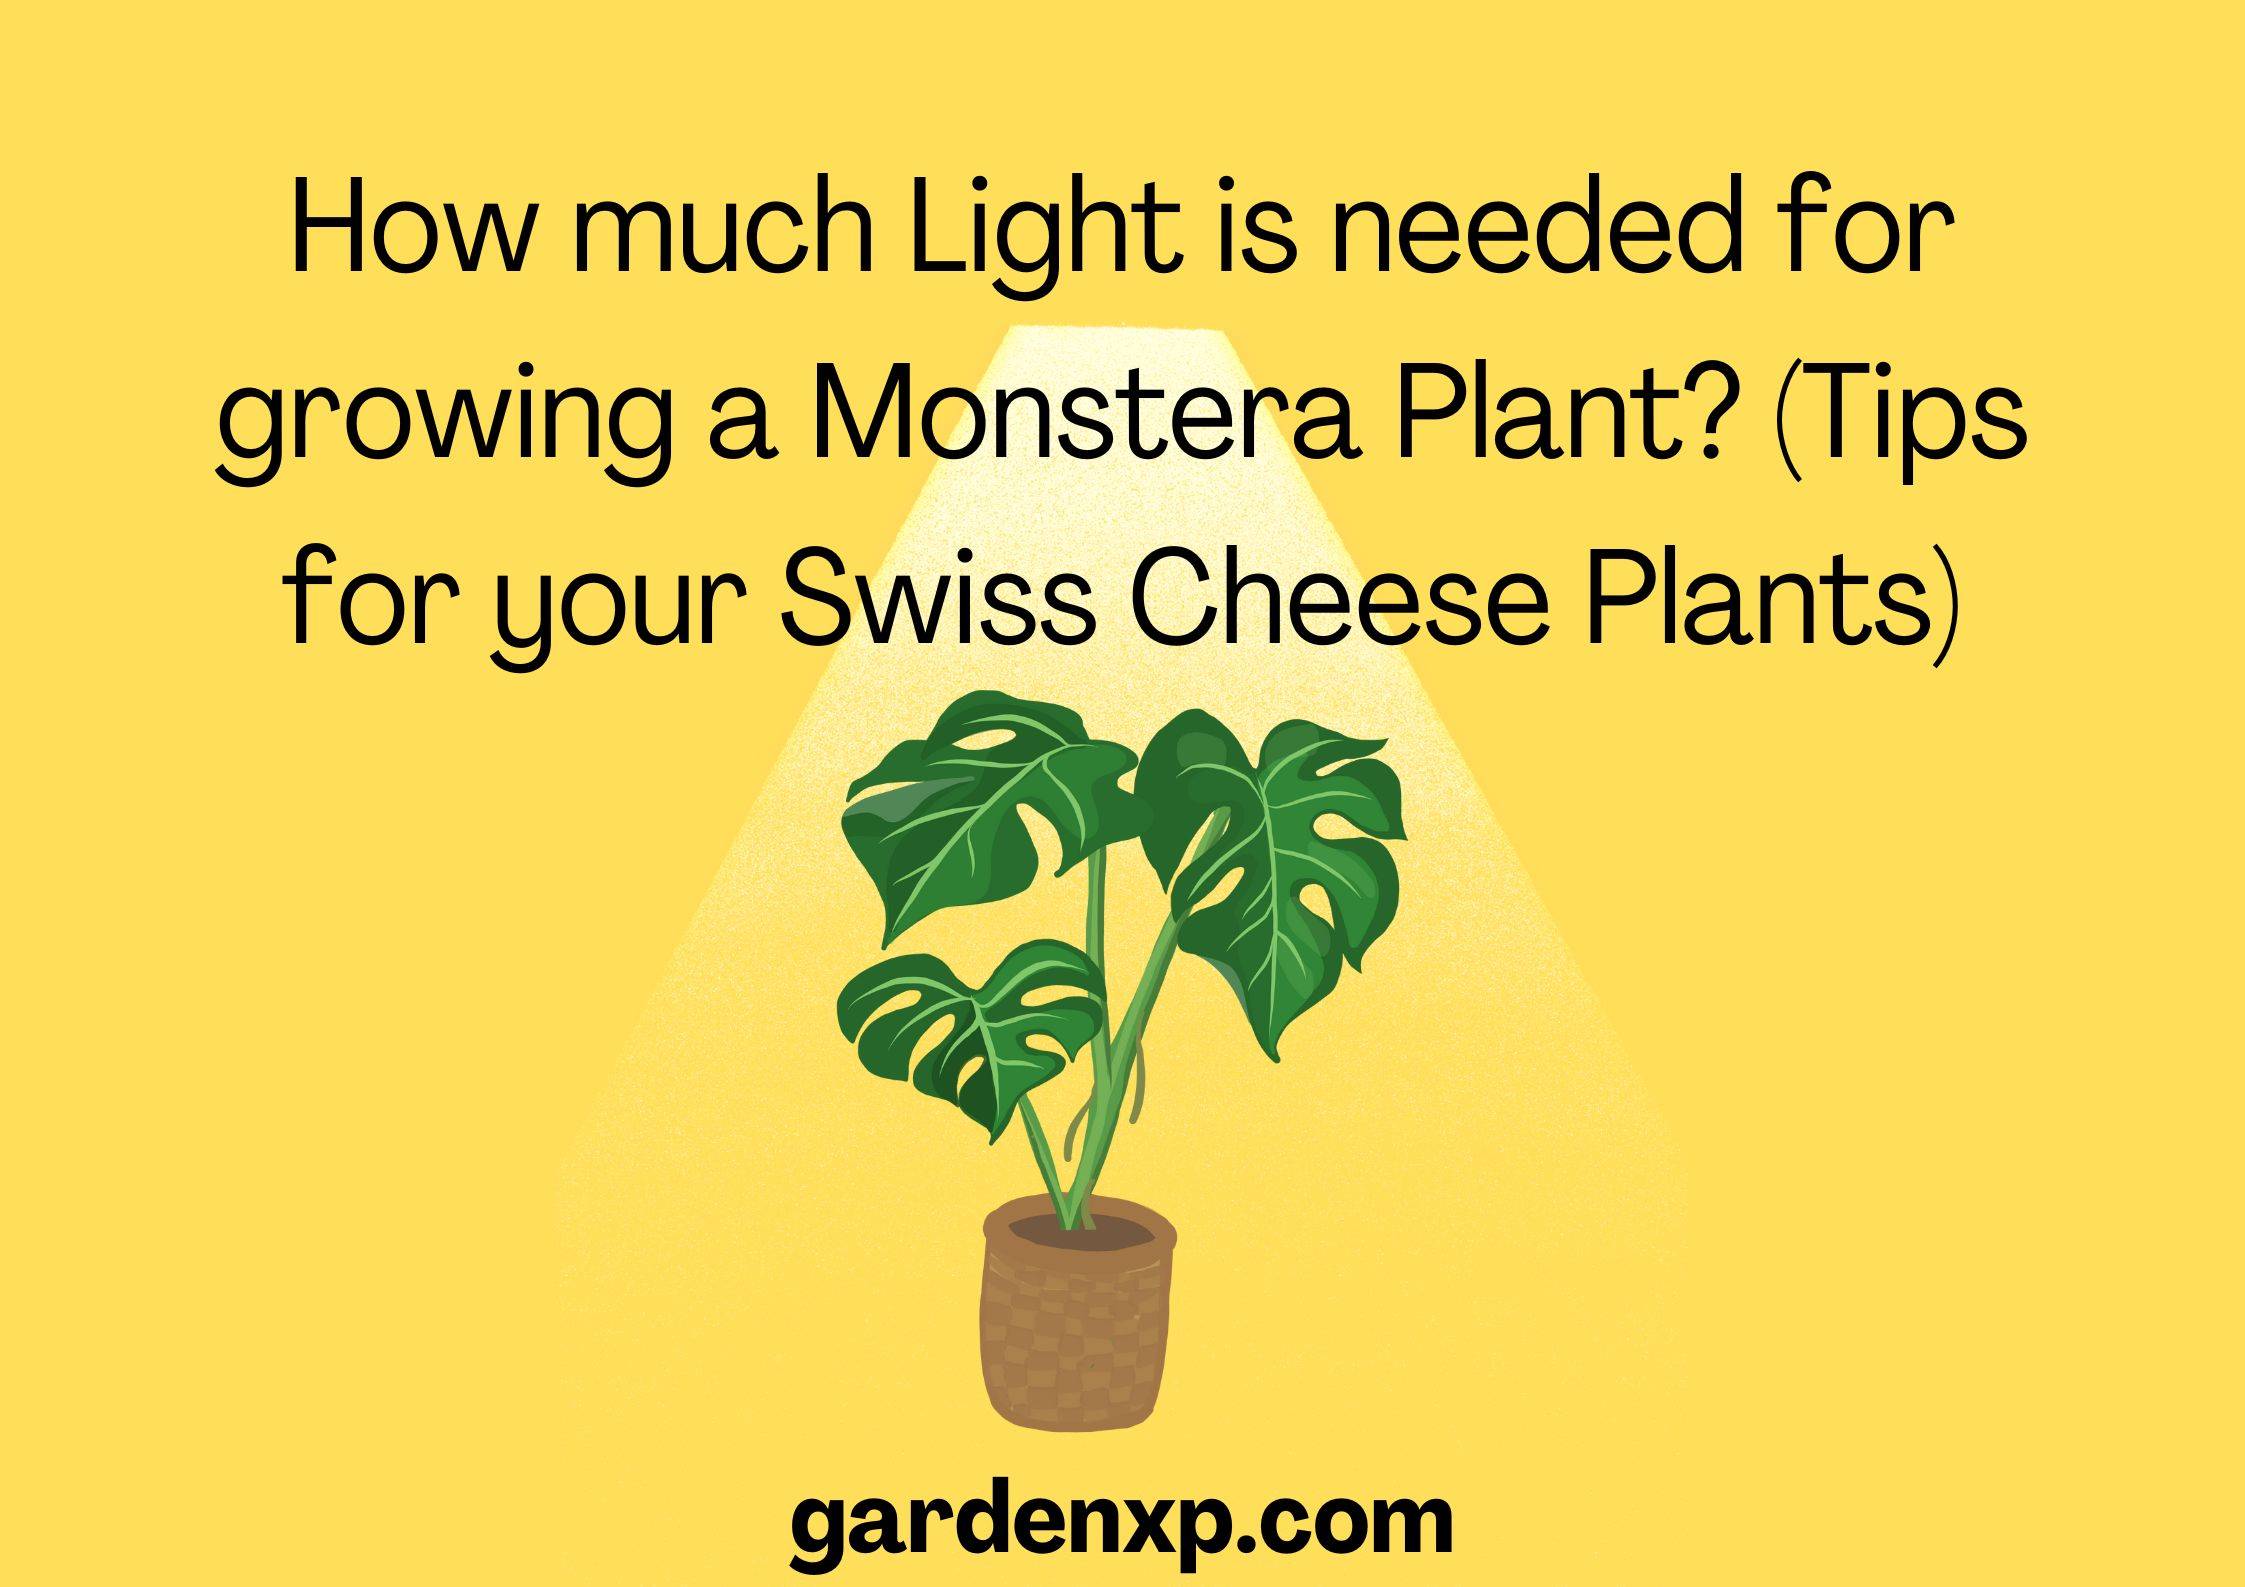 How much Light is needed for growing a Monstera Plant? (Tips for your Swiss Cheese Plants)